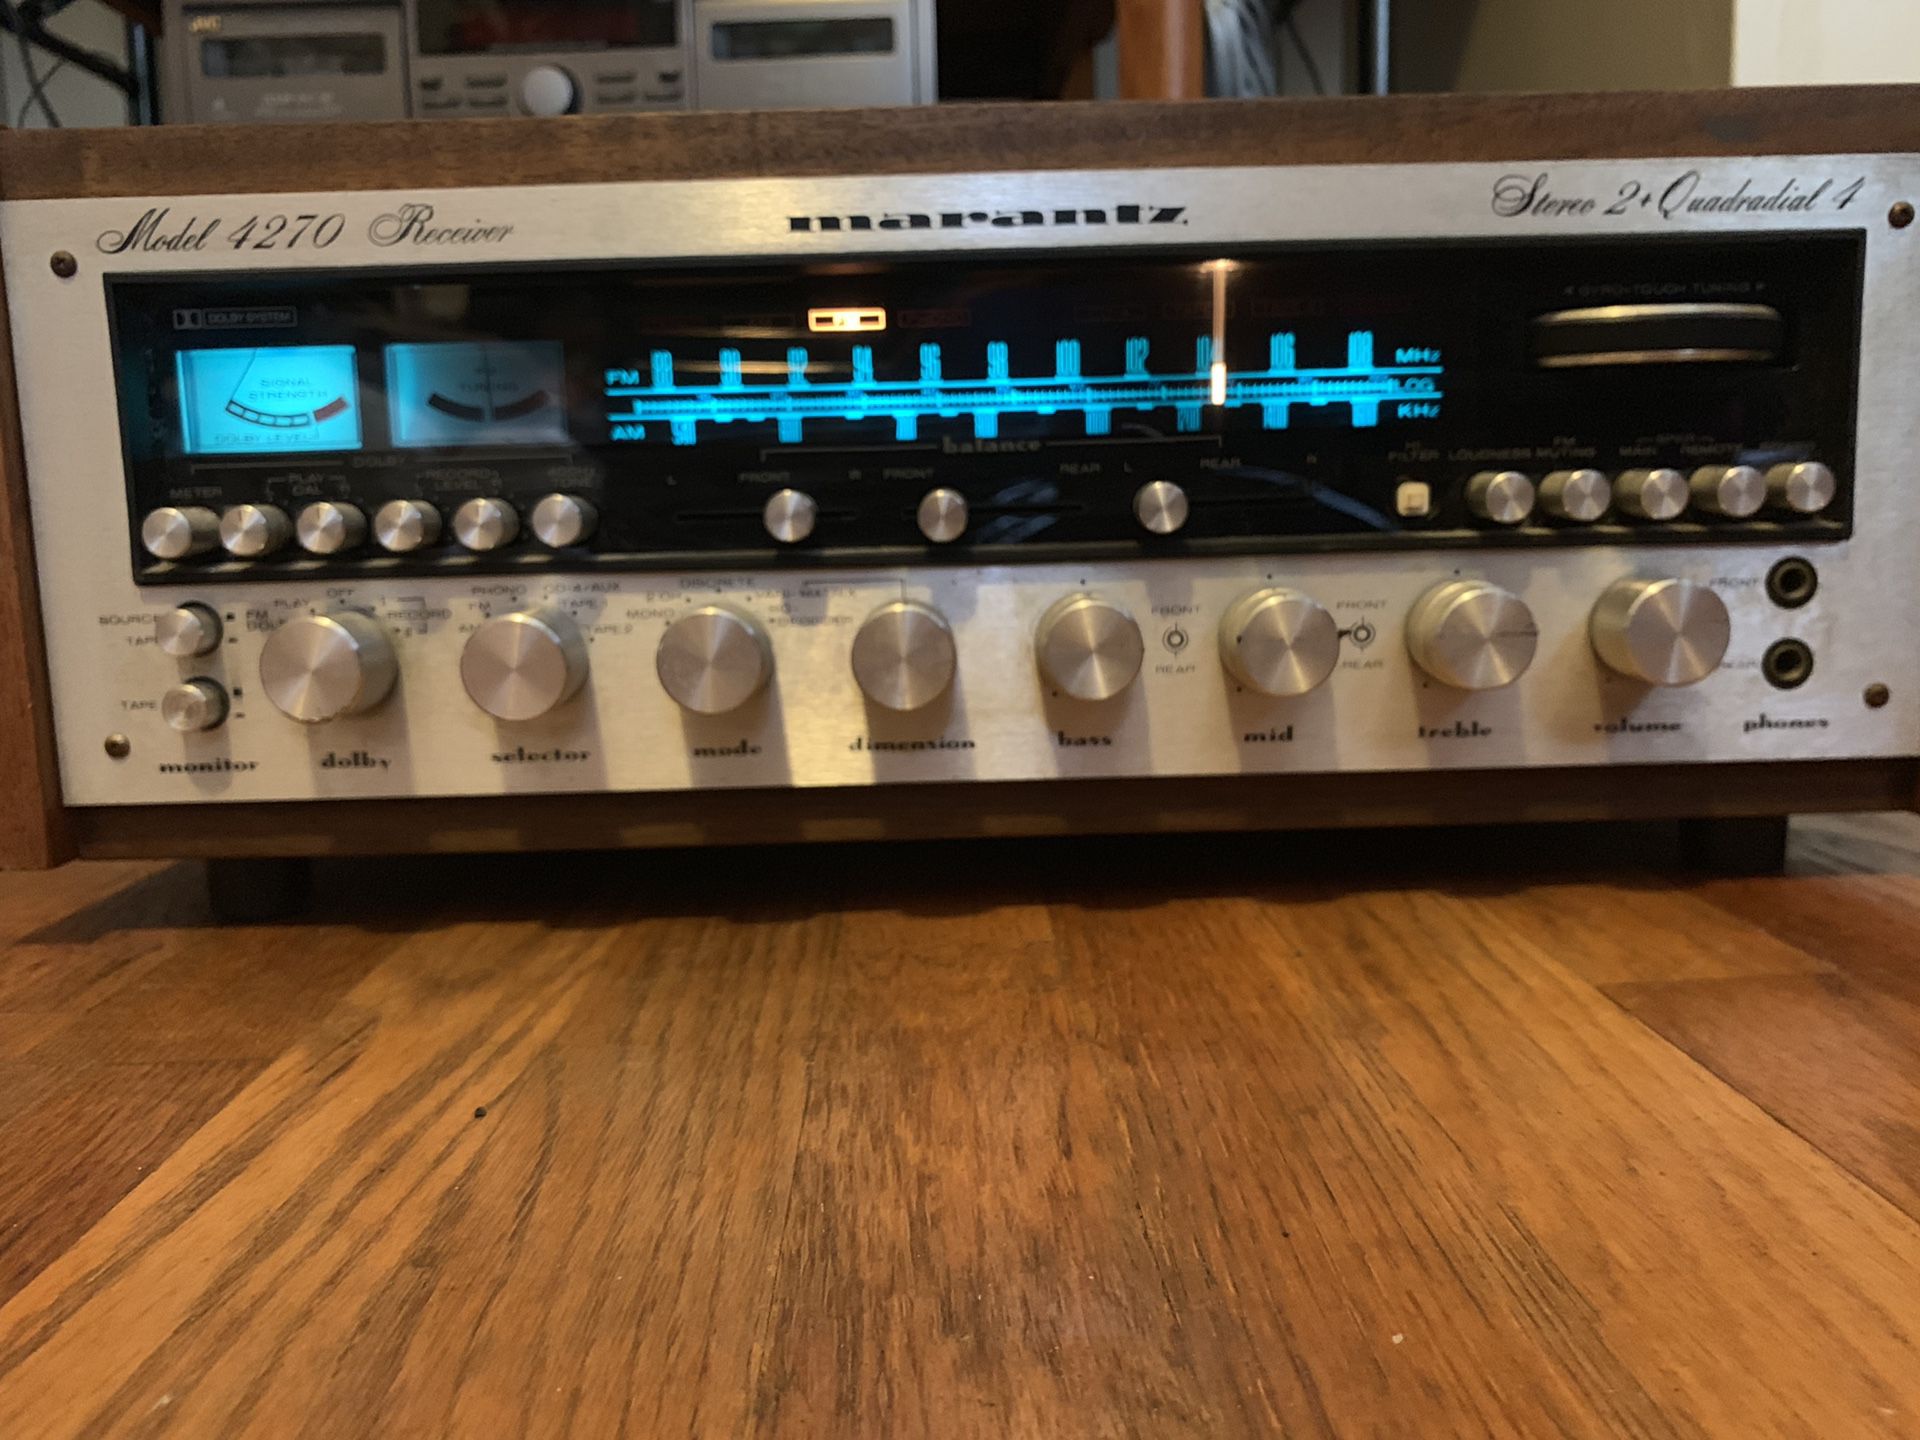 MARANTZ 4270 Stereo 2 quadradial 4 receiver with wood case